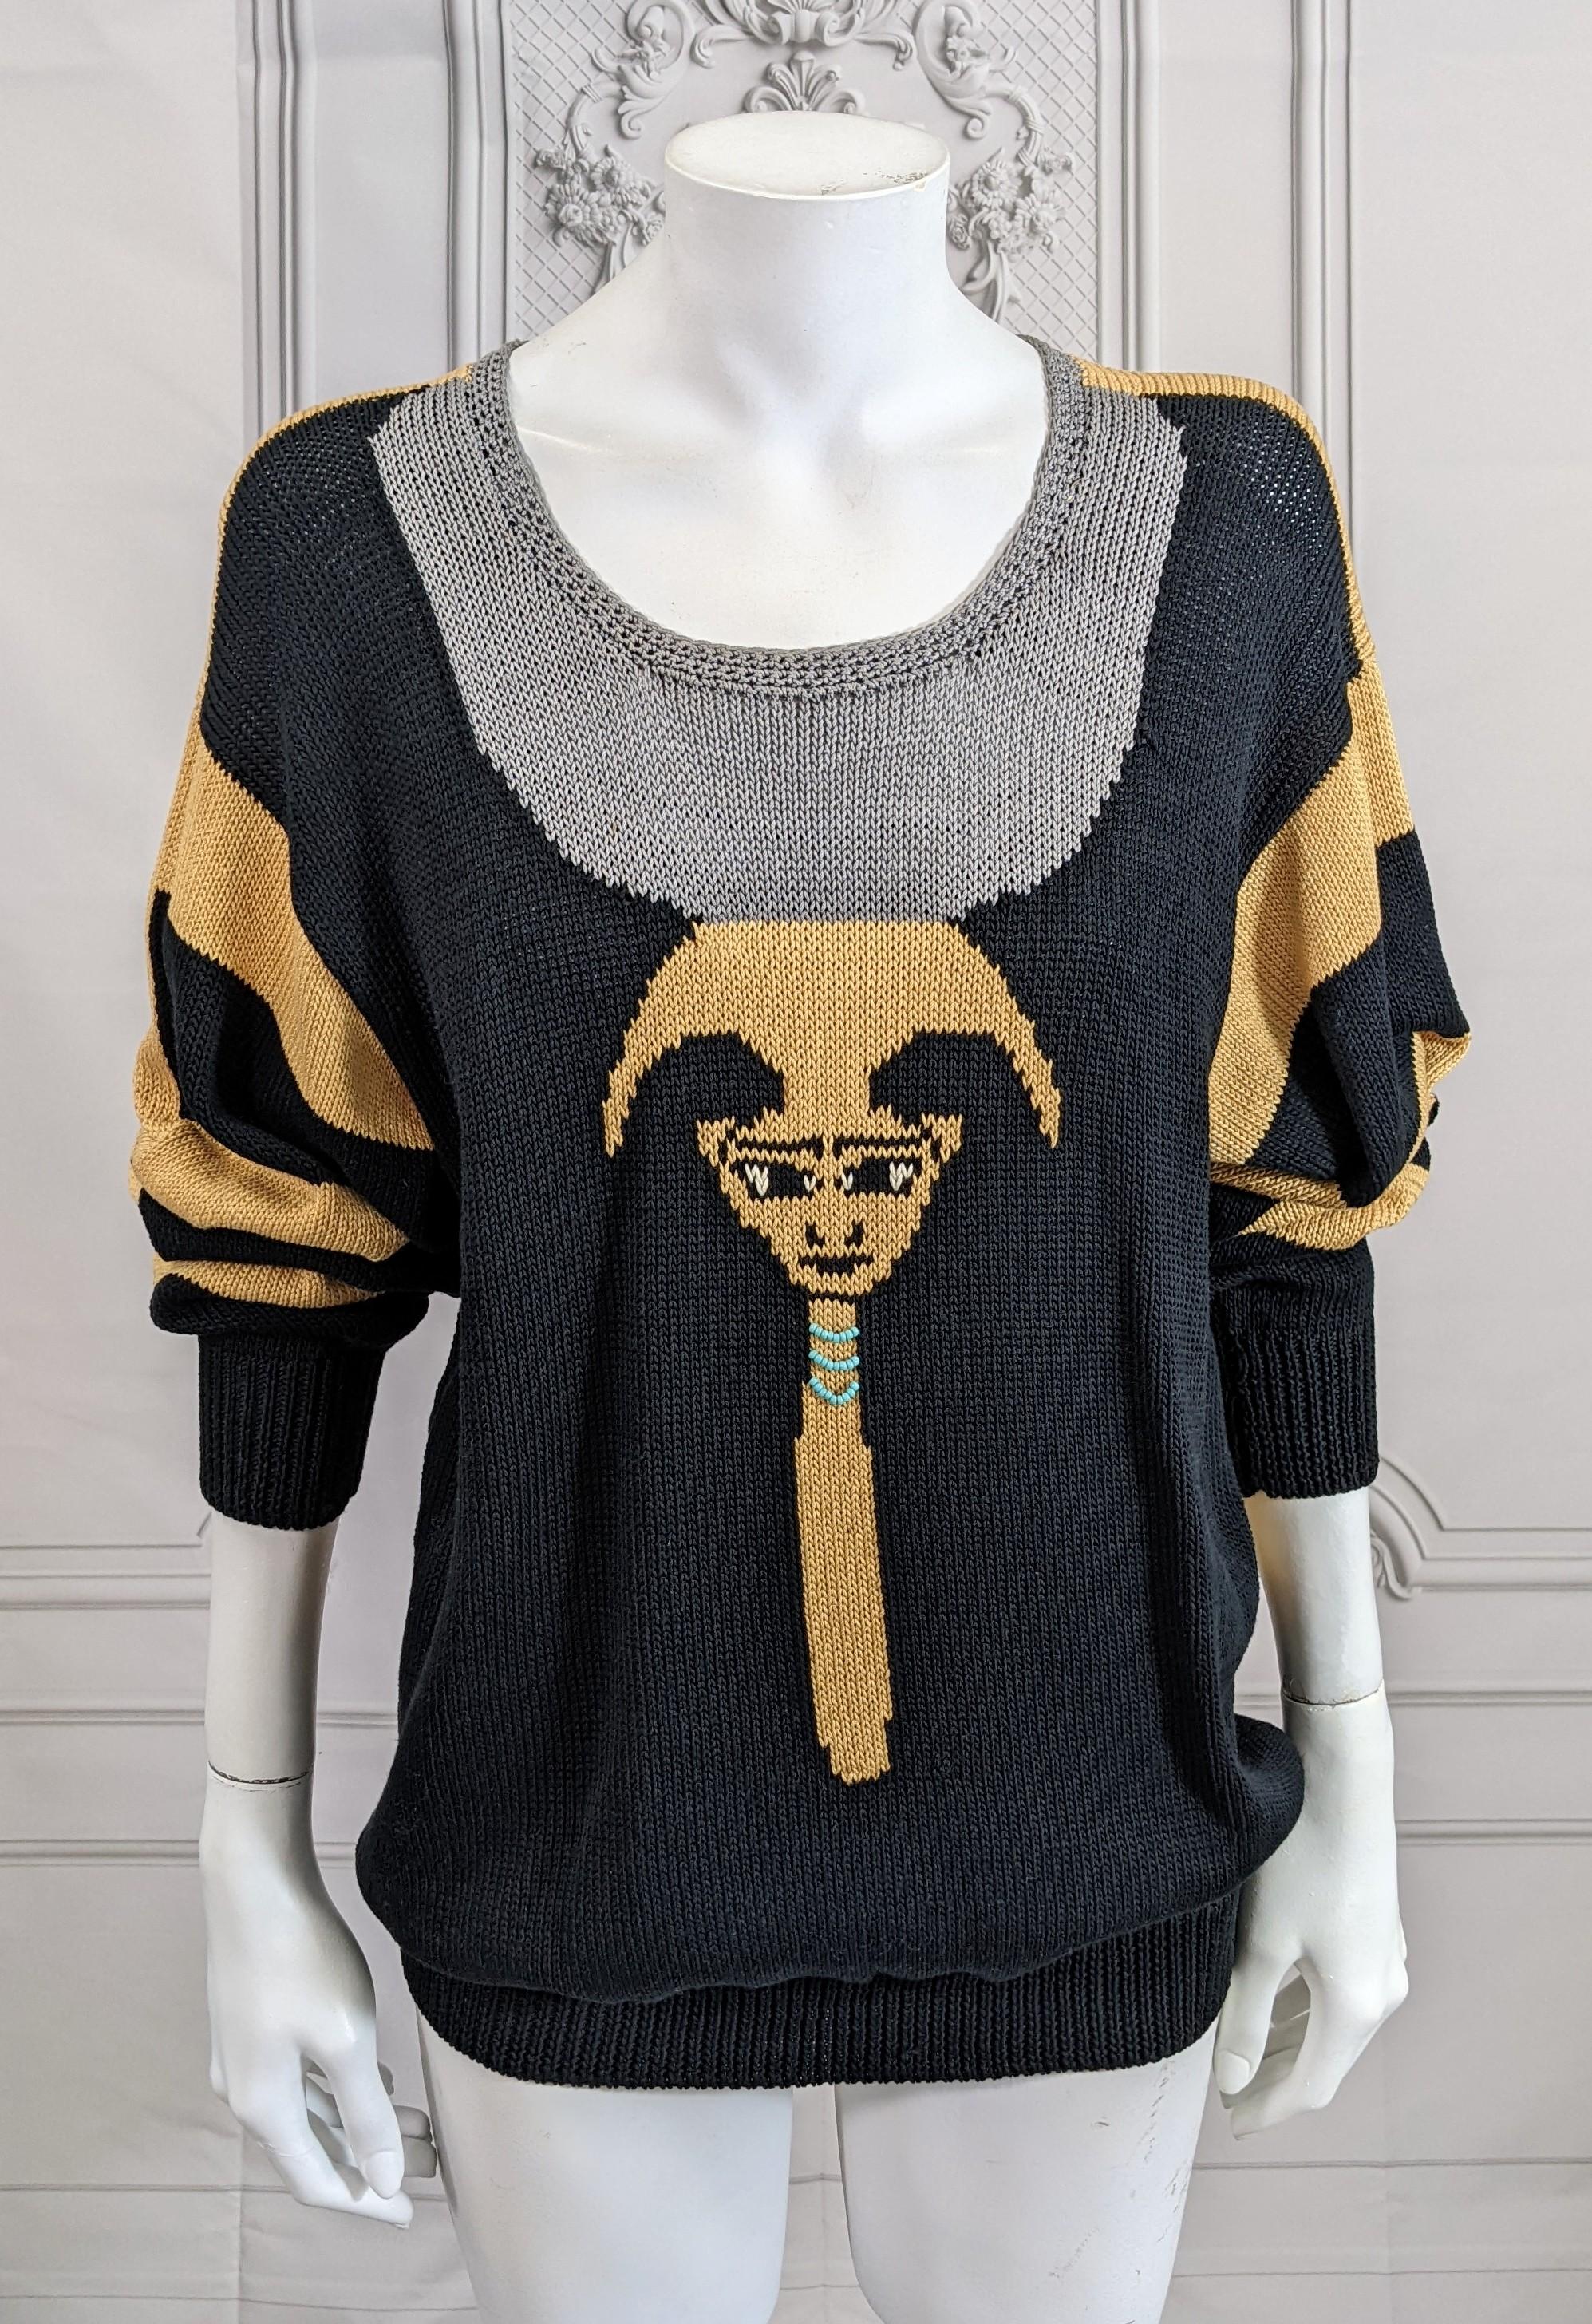 Handknit Eygptian Themed Sweater, Dia North of Boston In Excellent Condition For Sale In New York, NY